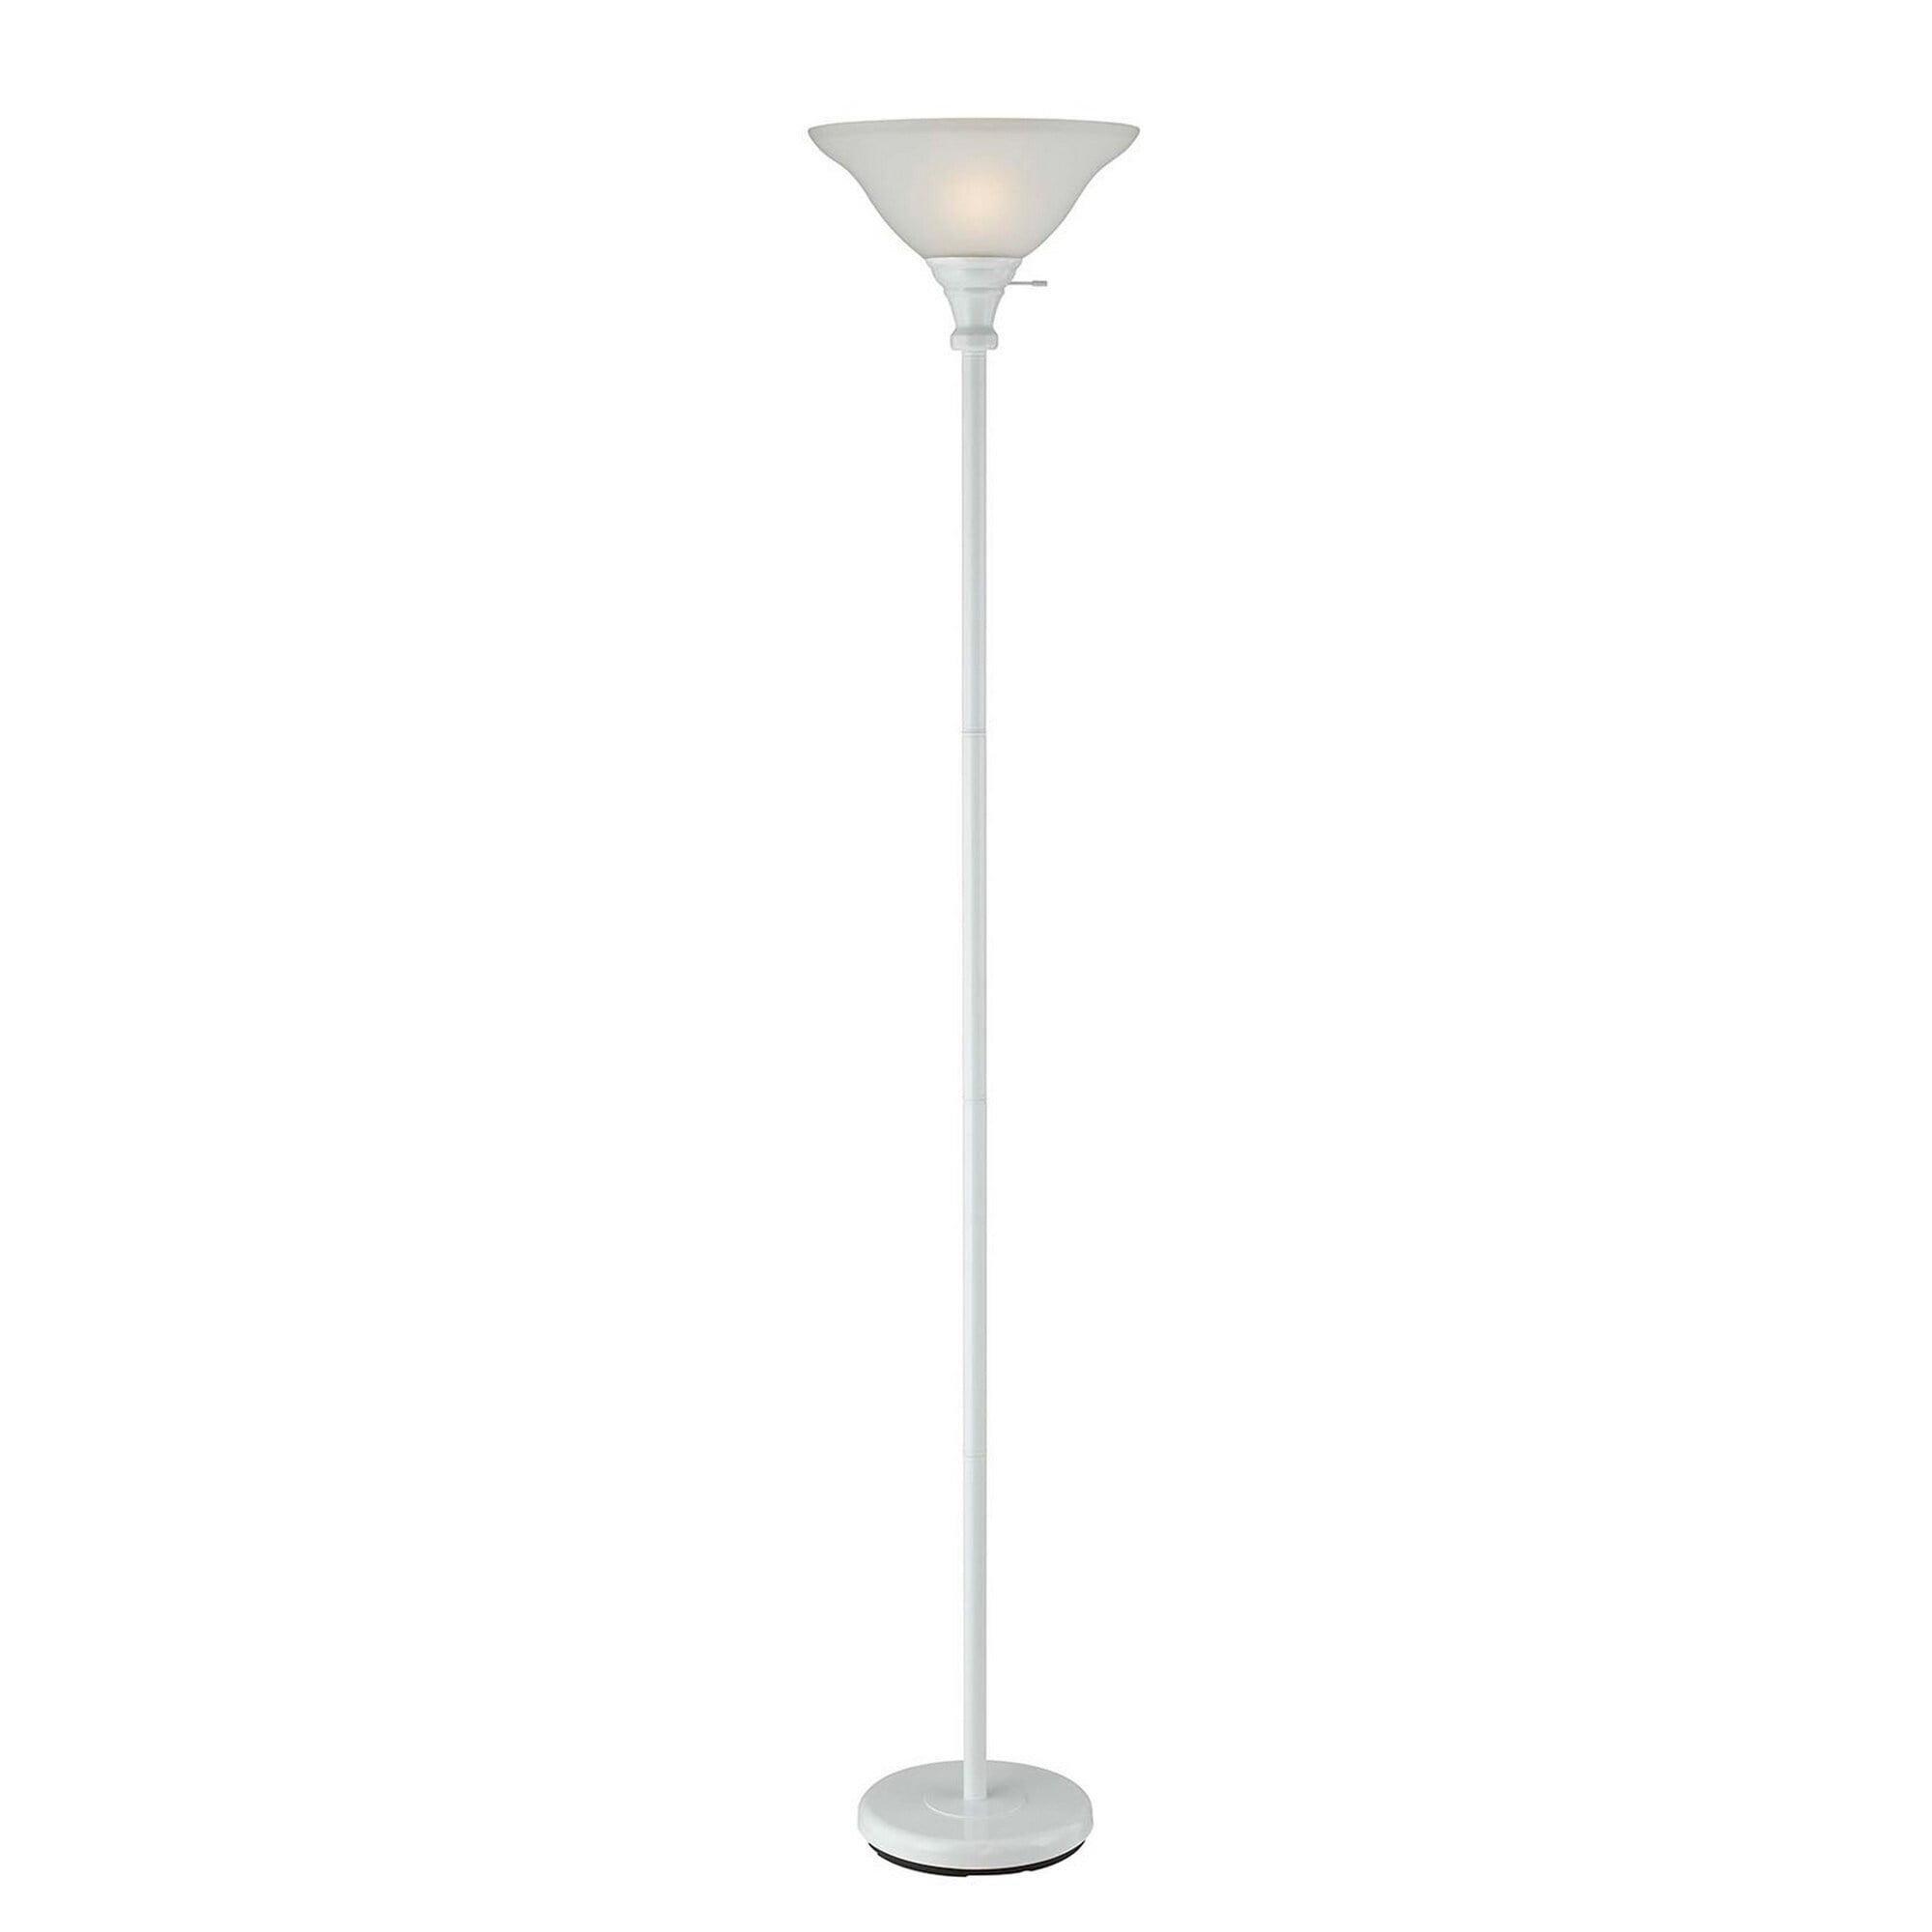 Sophisticated White Torchiere Floor Lamp with Frosted Glass Shade